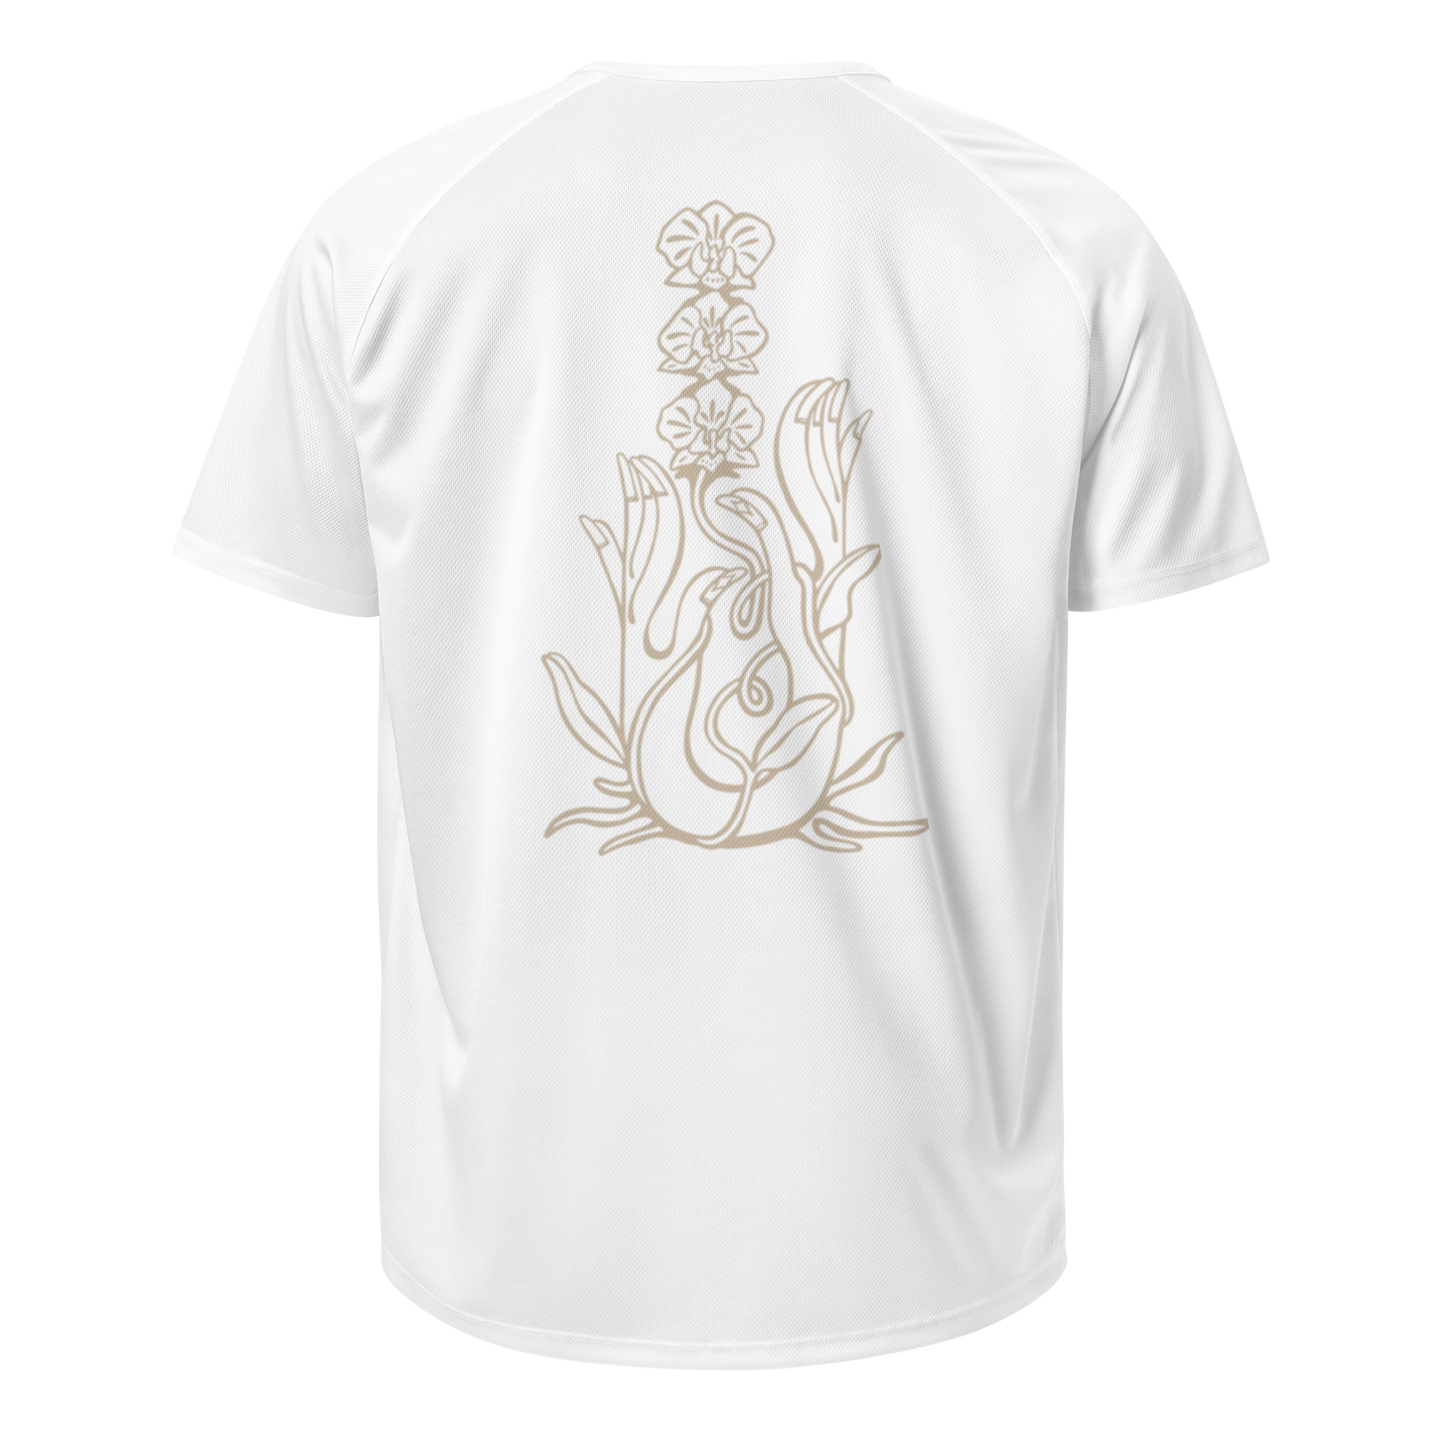 Sports t-shirt Unisex - Orchid White